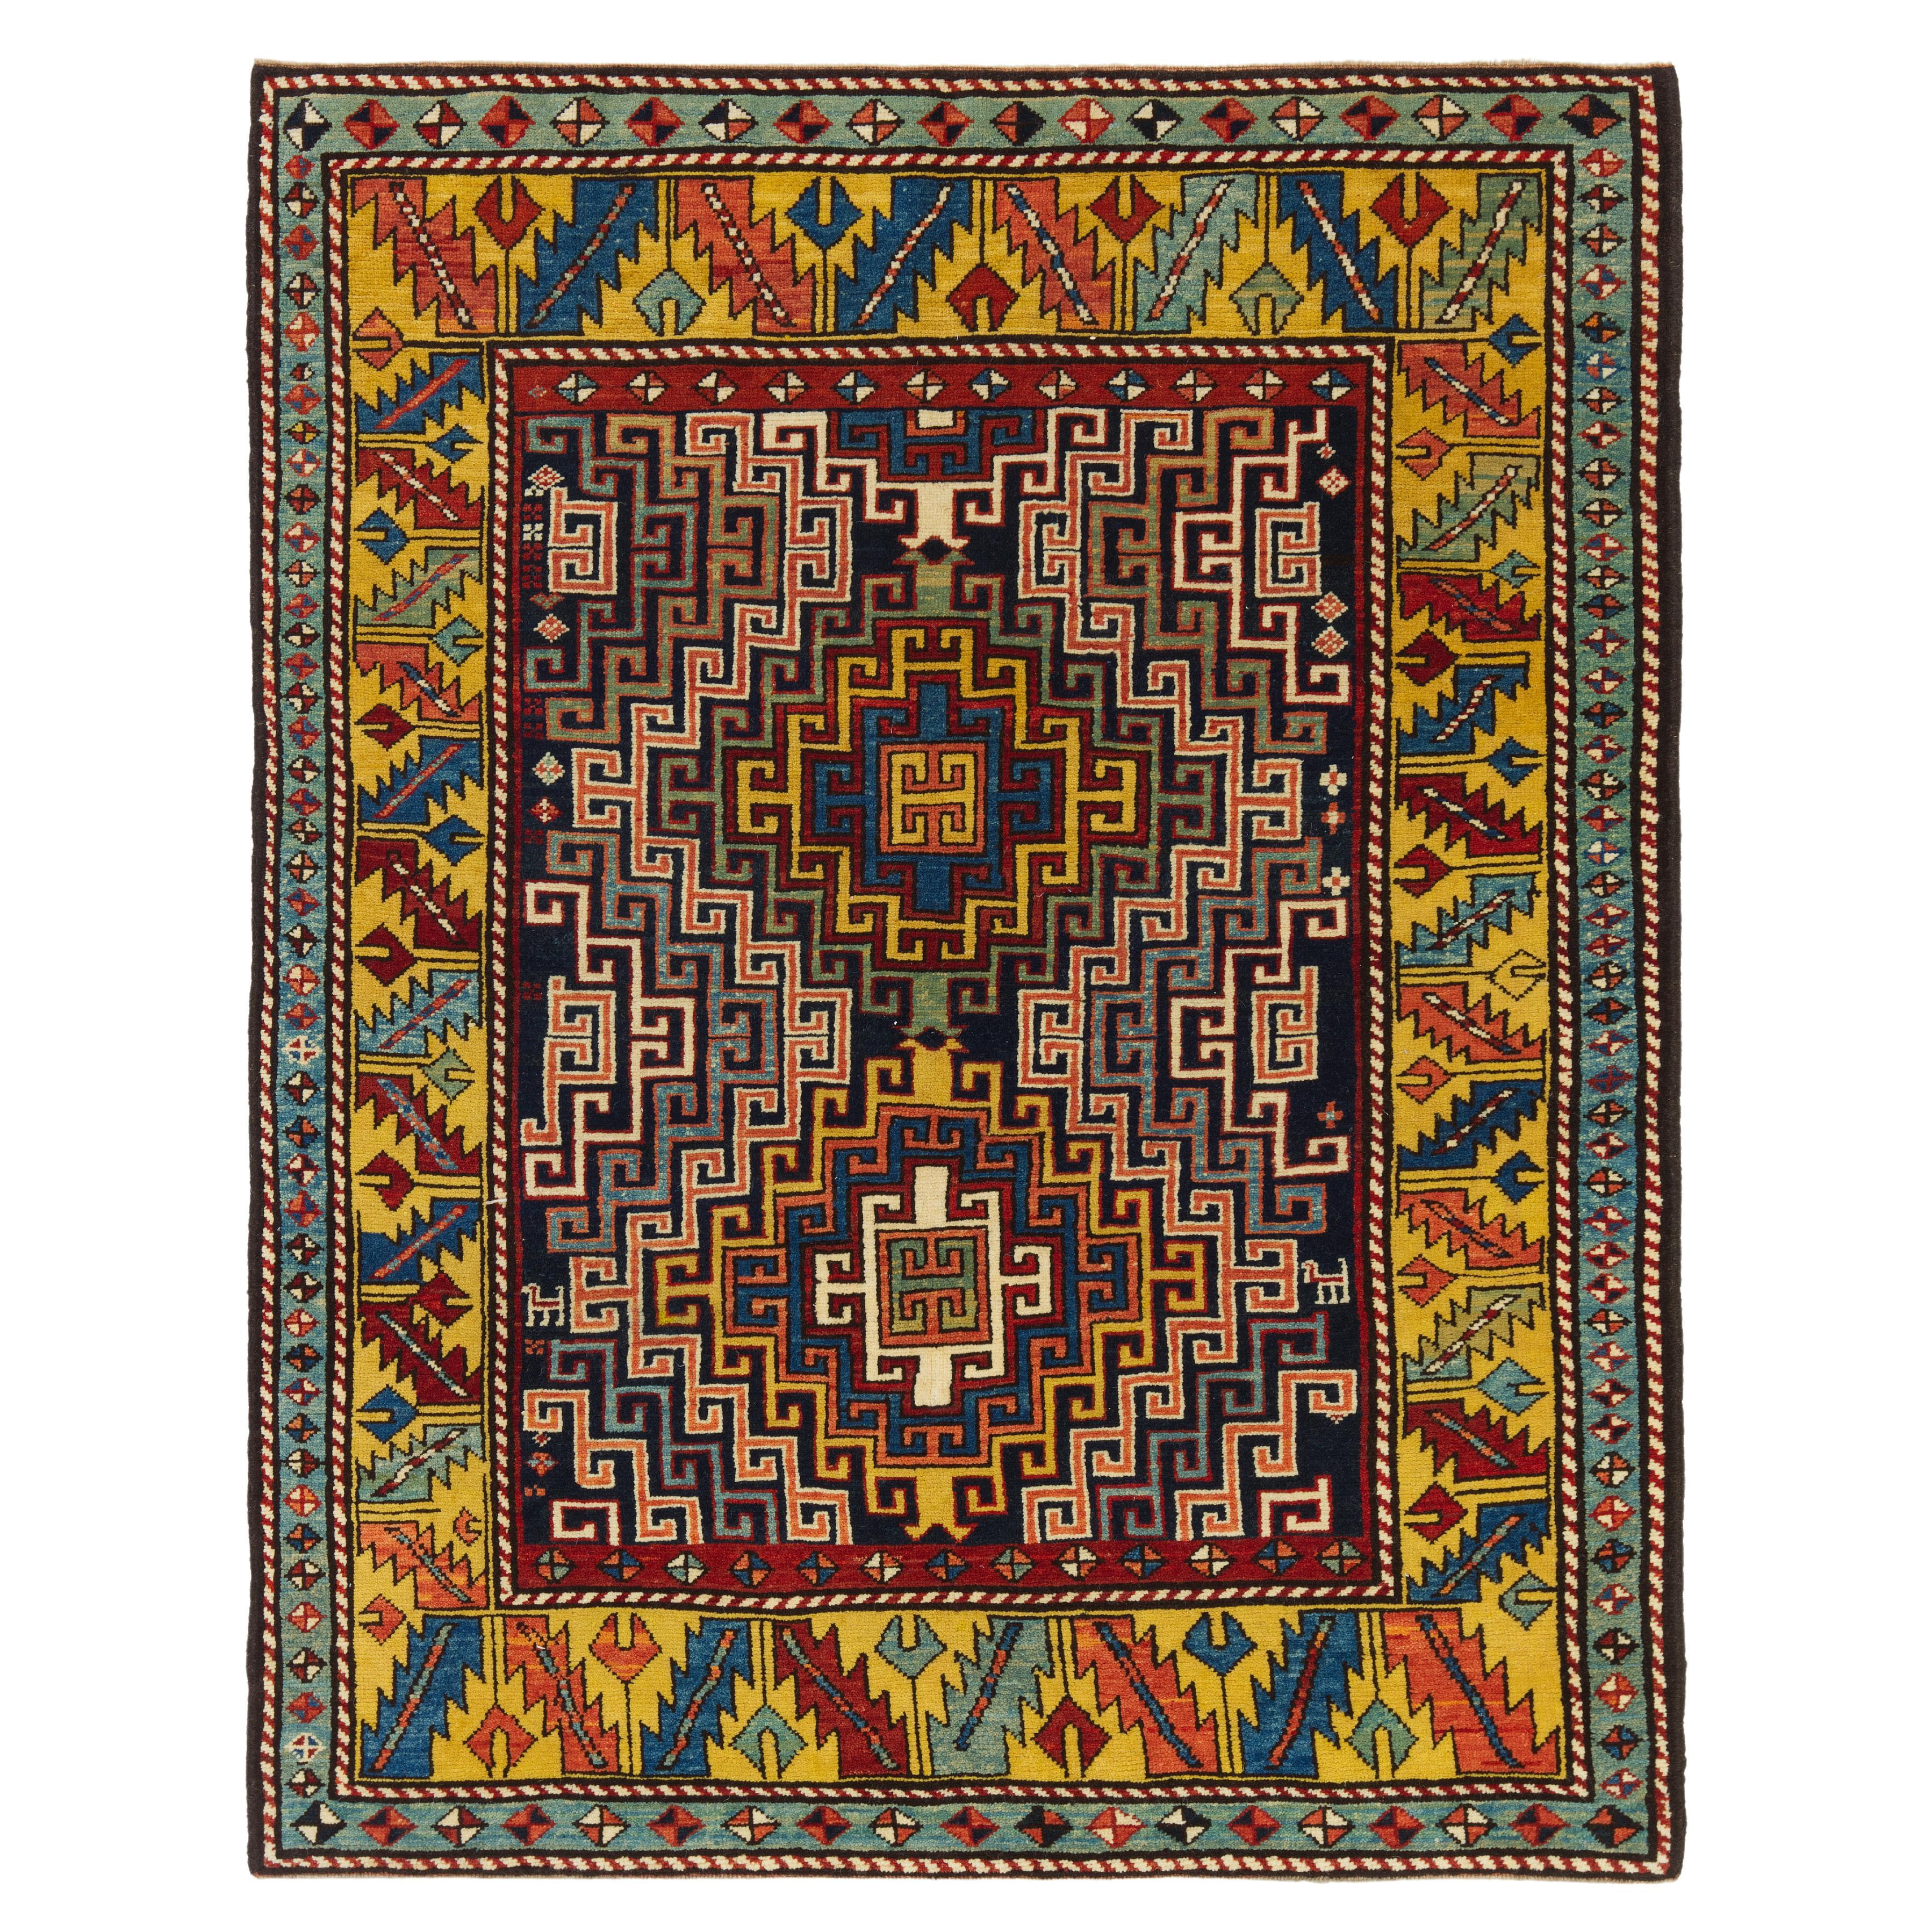 Ararat Rugs Kazak Rug with Hooked Medallions Antique Revival Carpet Natural Dyed For Sale